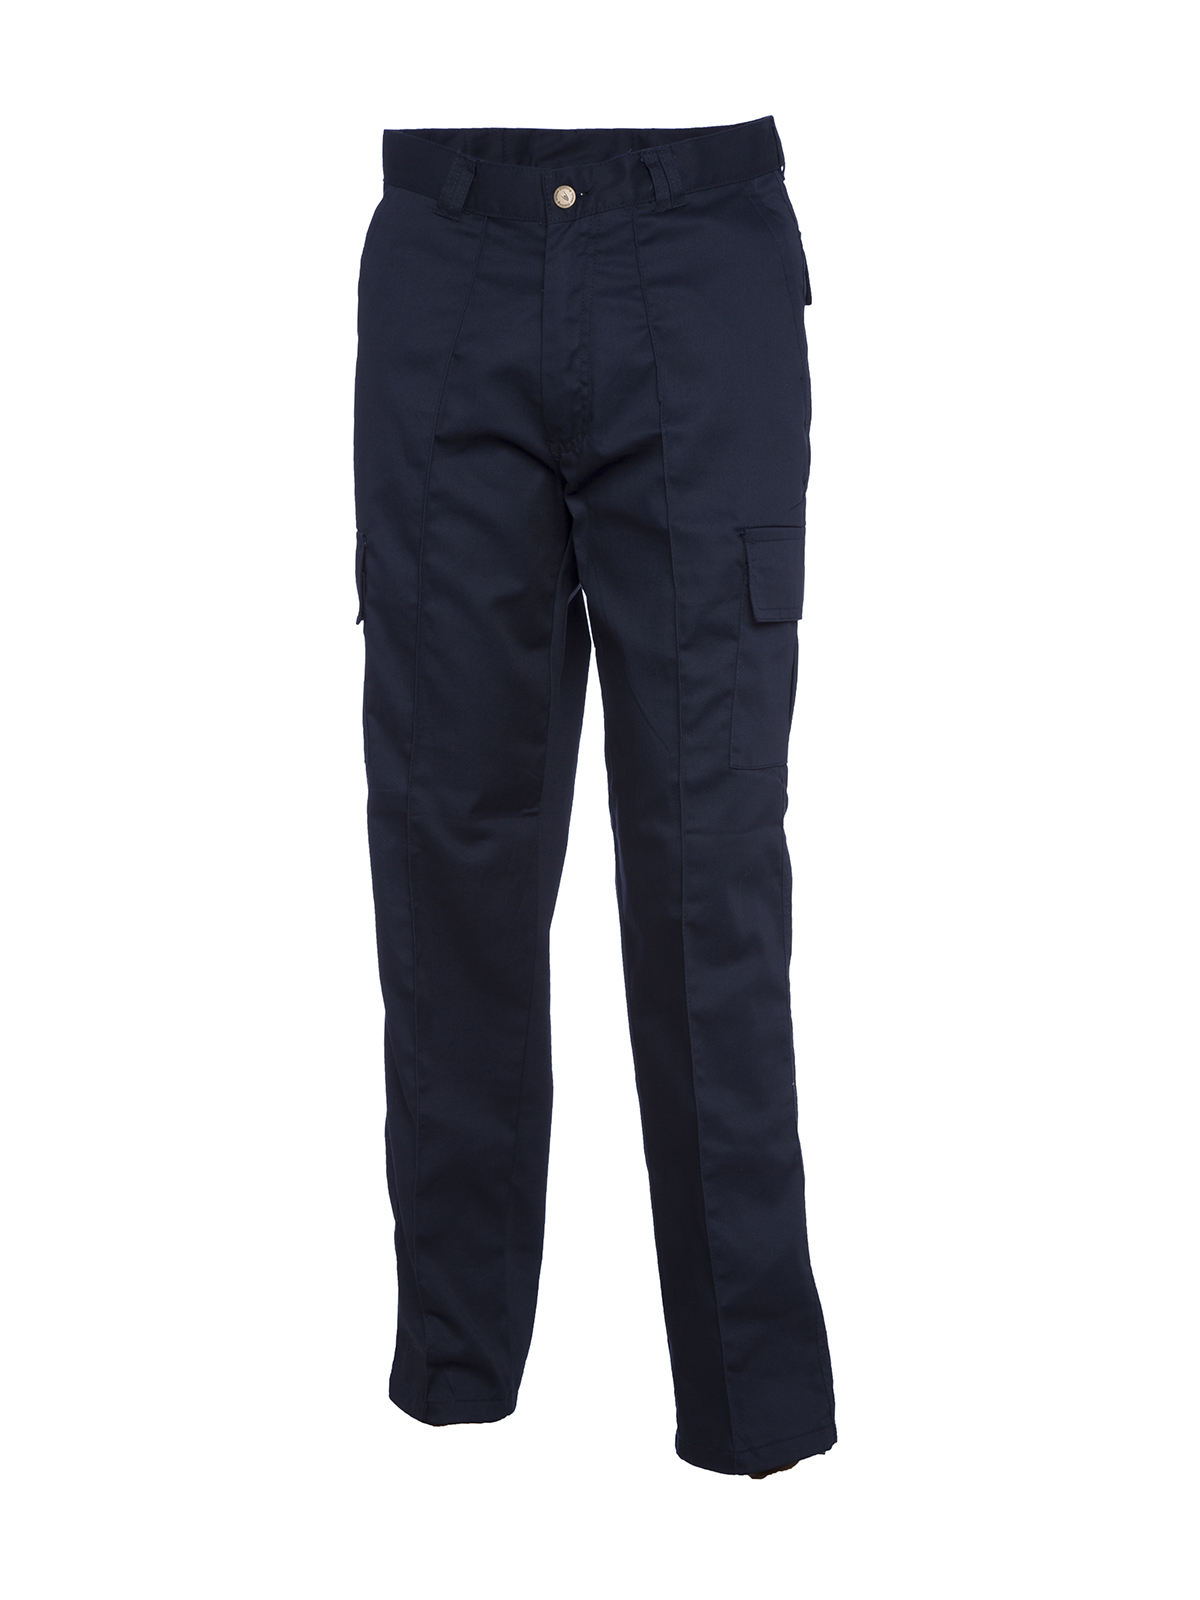 Cargo Trousers, Navy Blue - 38R